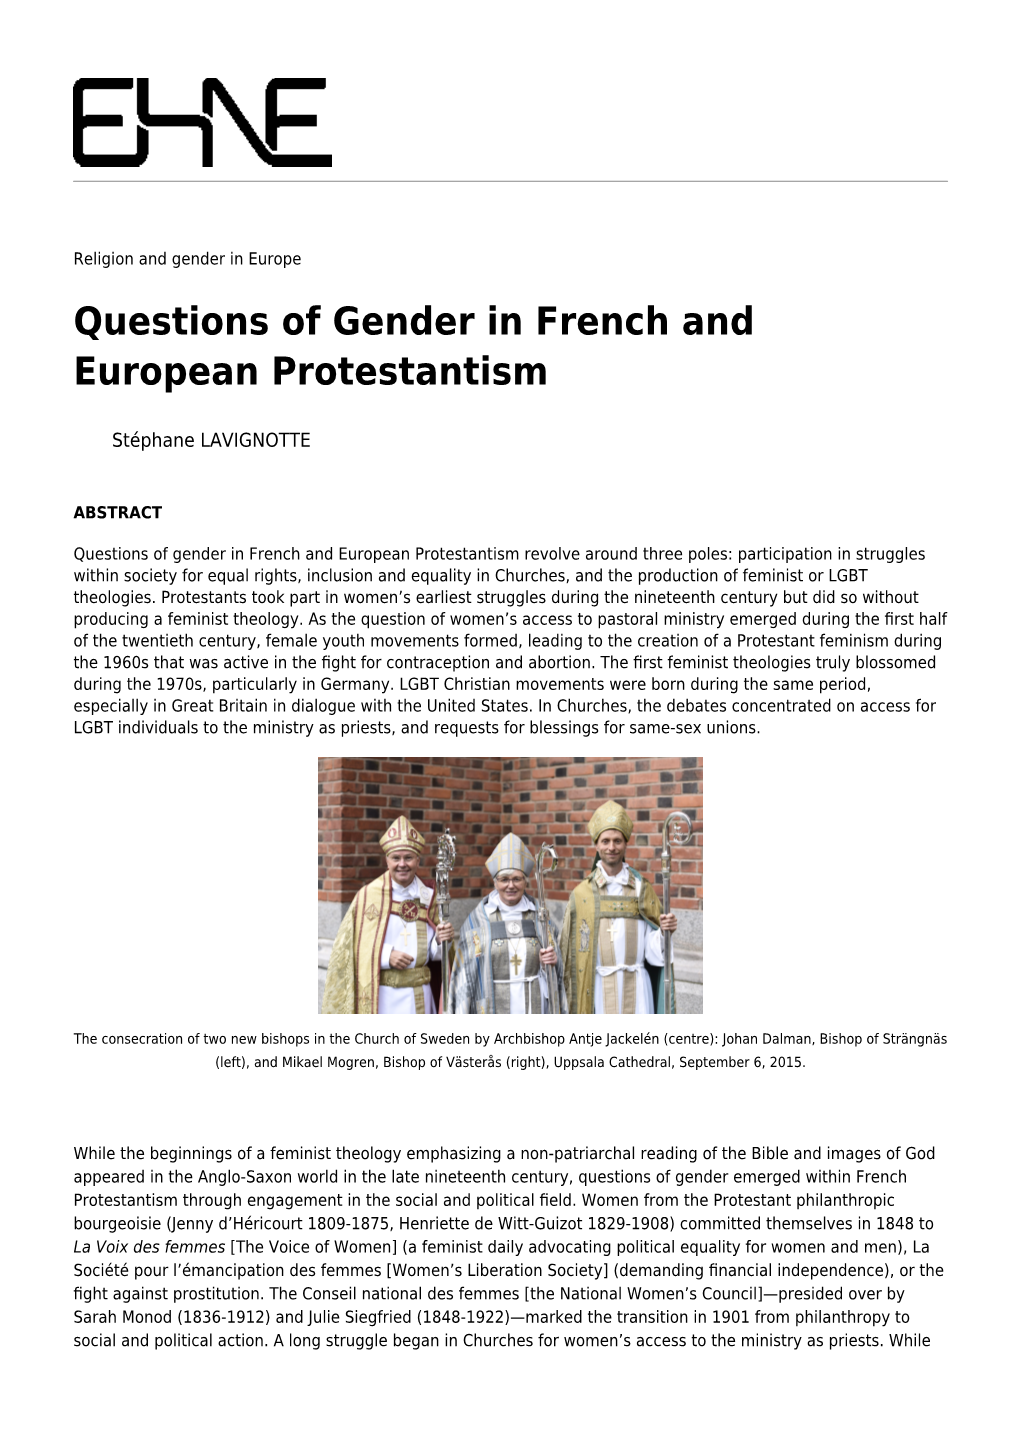 Questions of Gender in French and European Protestantism